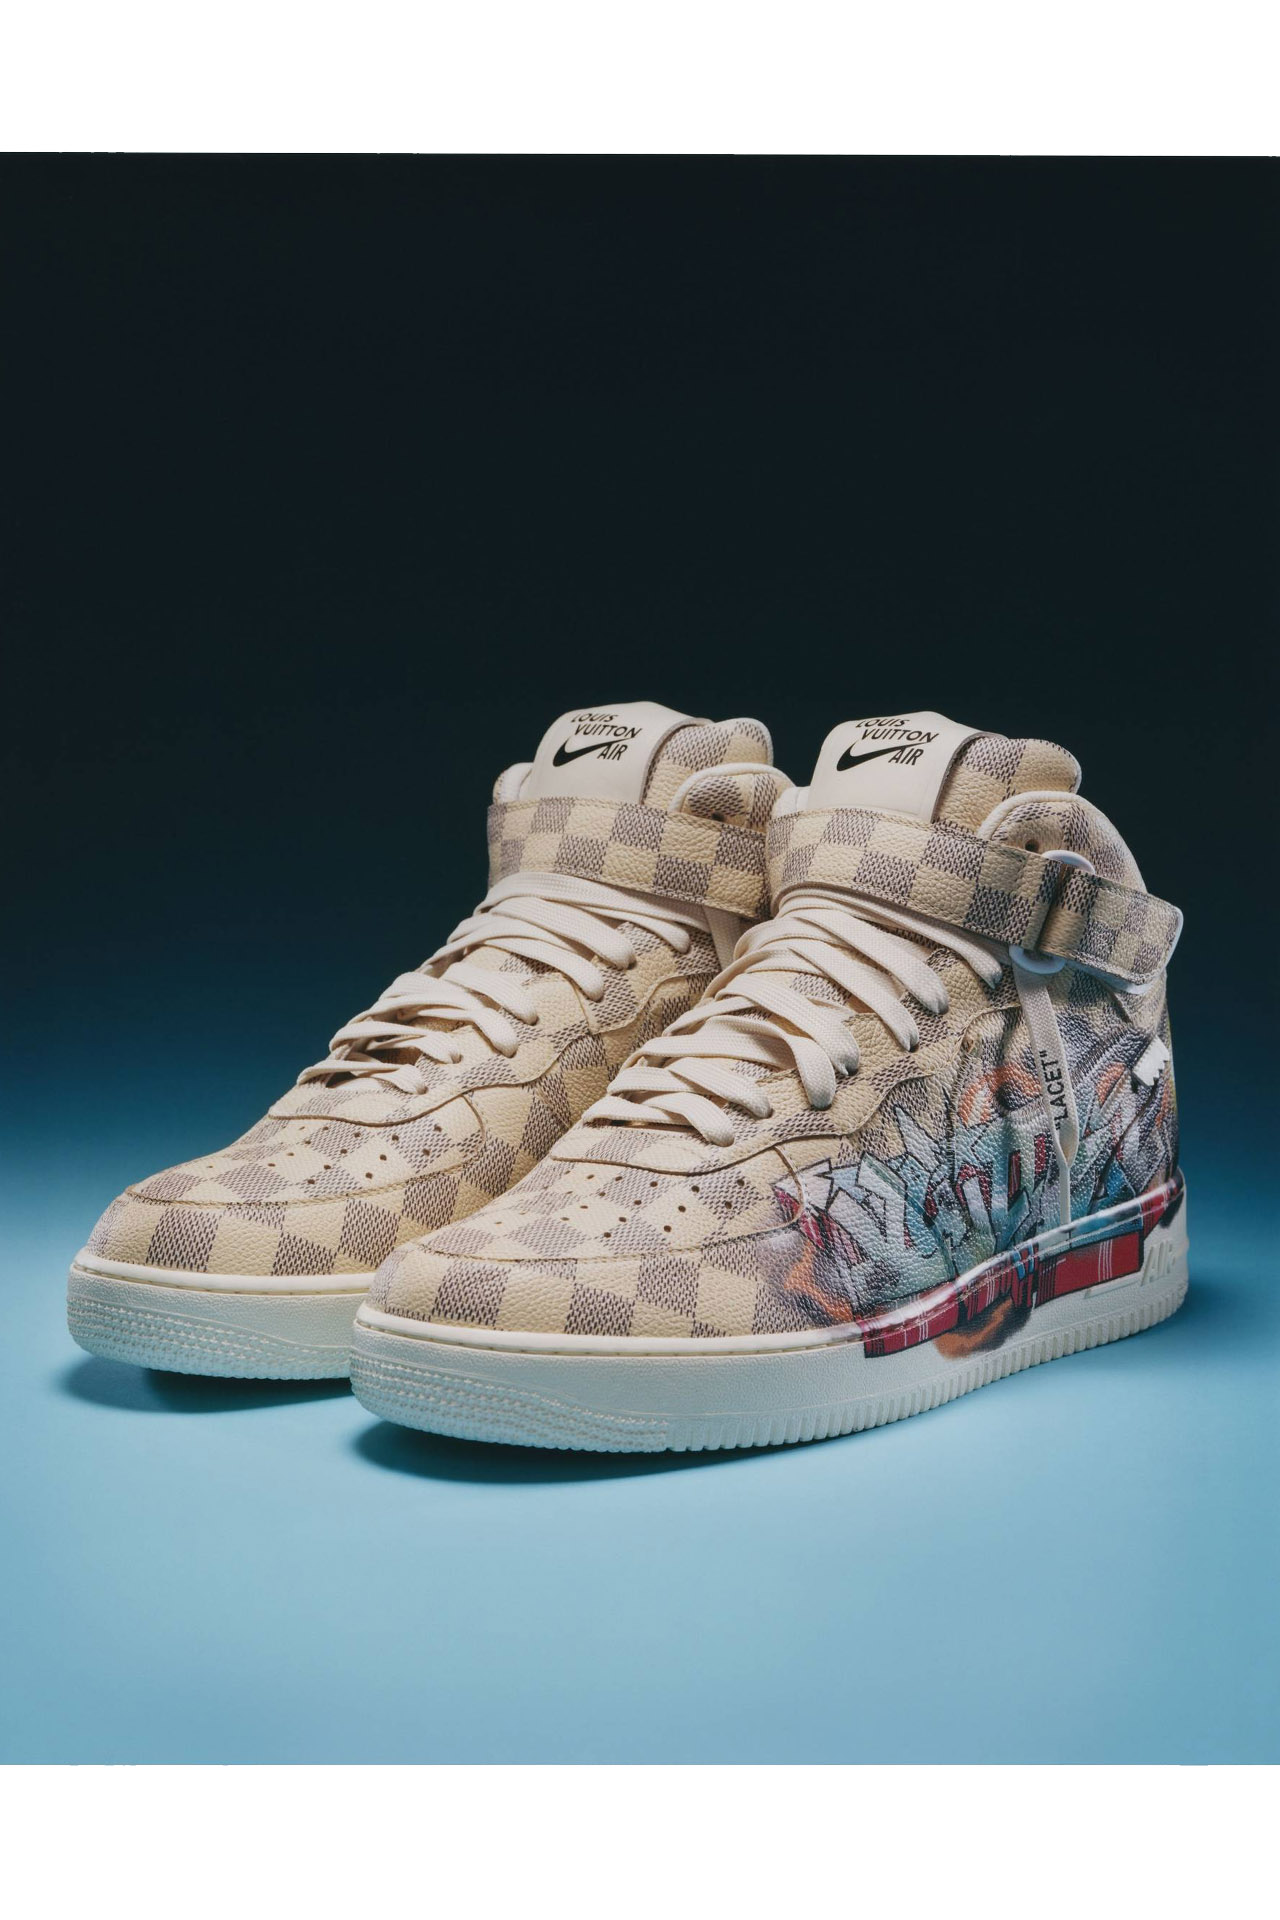 Louis Vuitton, Nike 'Air Force 1' Get Auctioned For 25 Million At Sotheby's